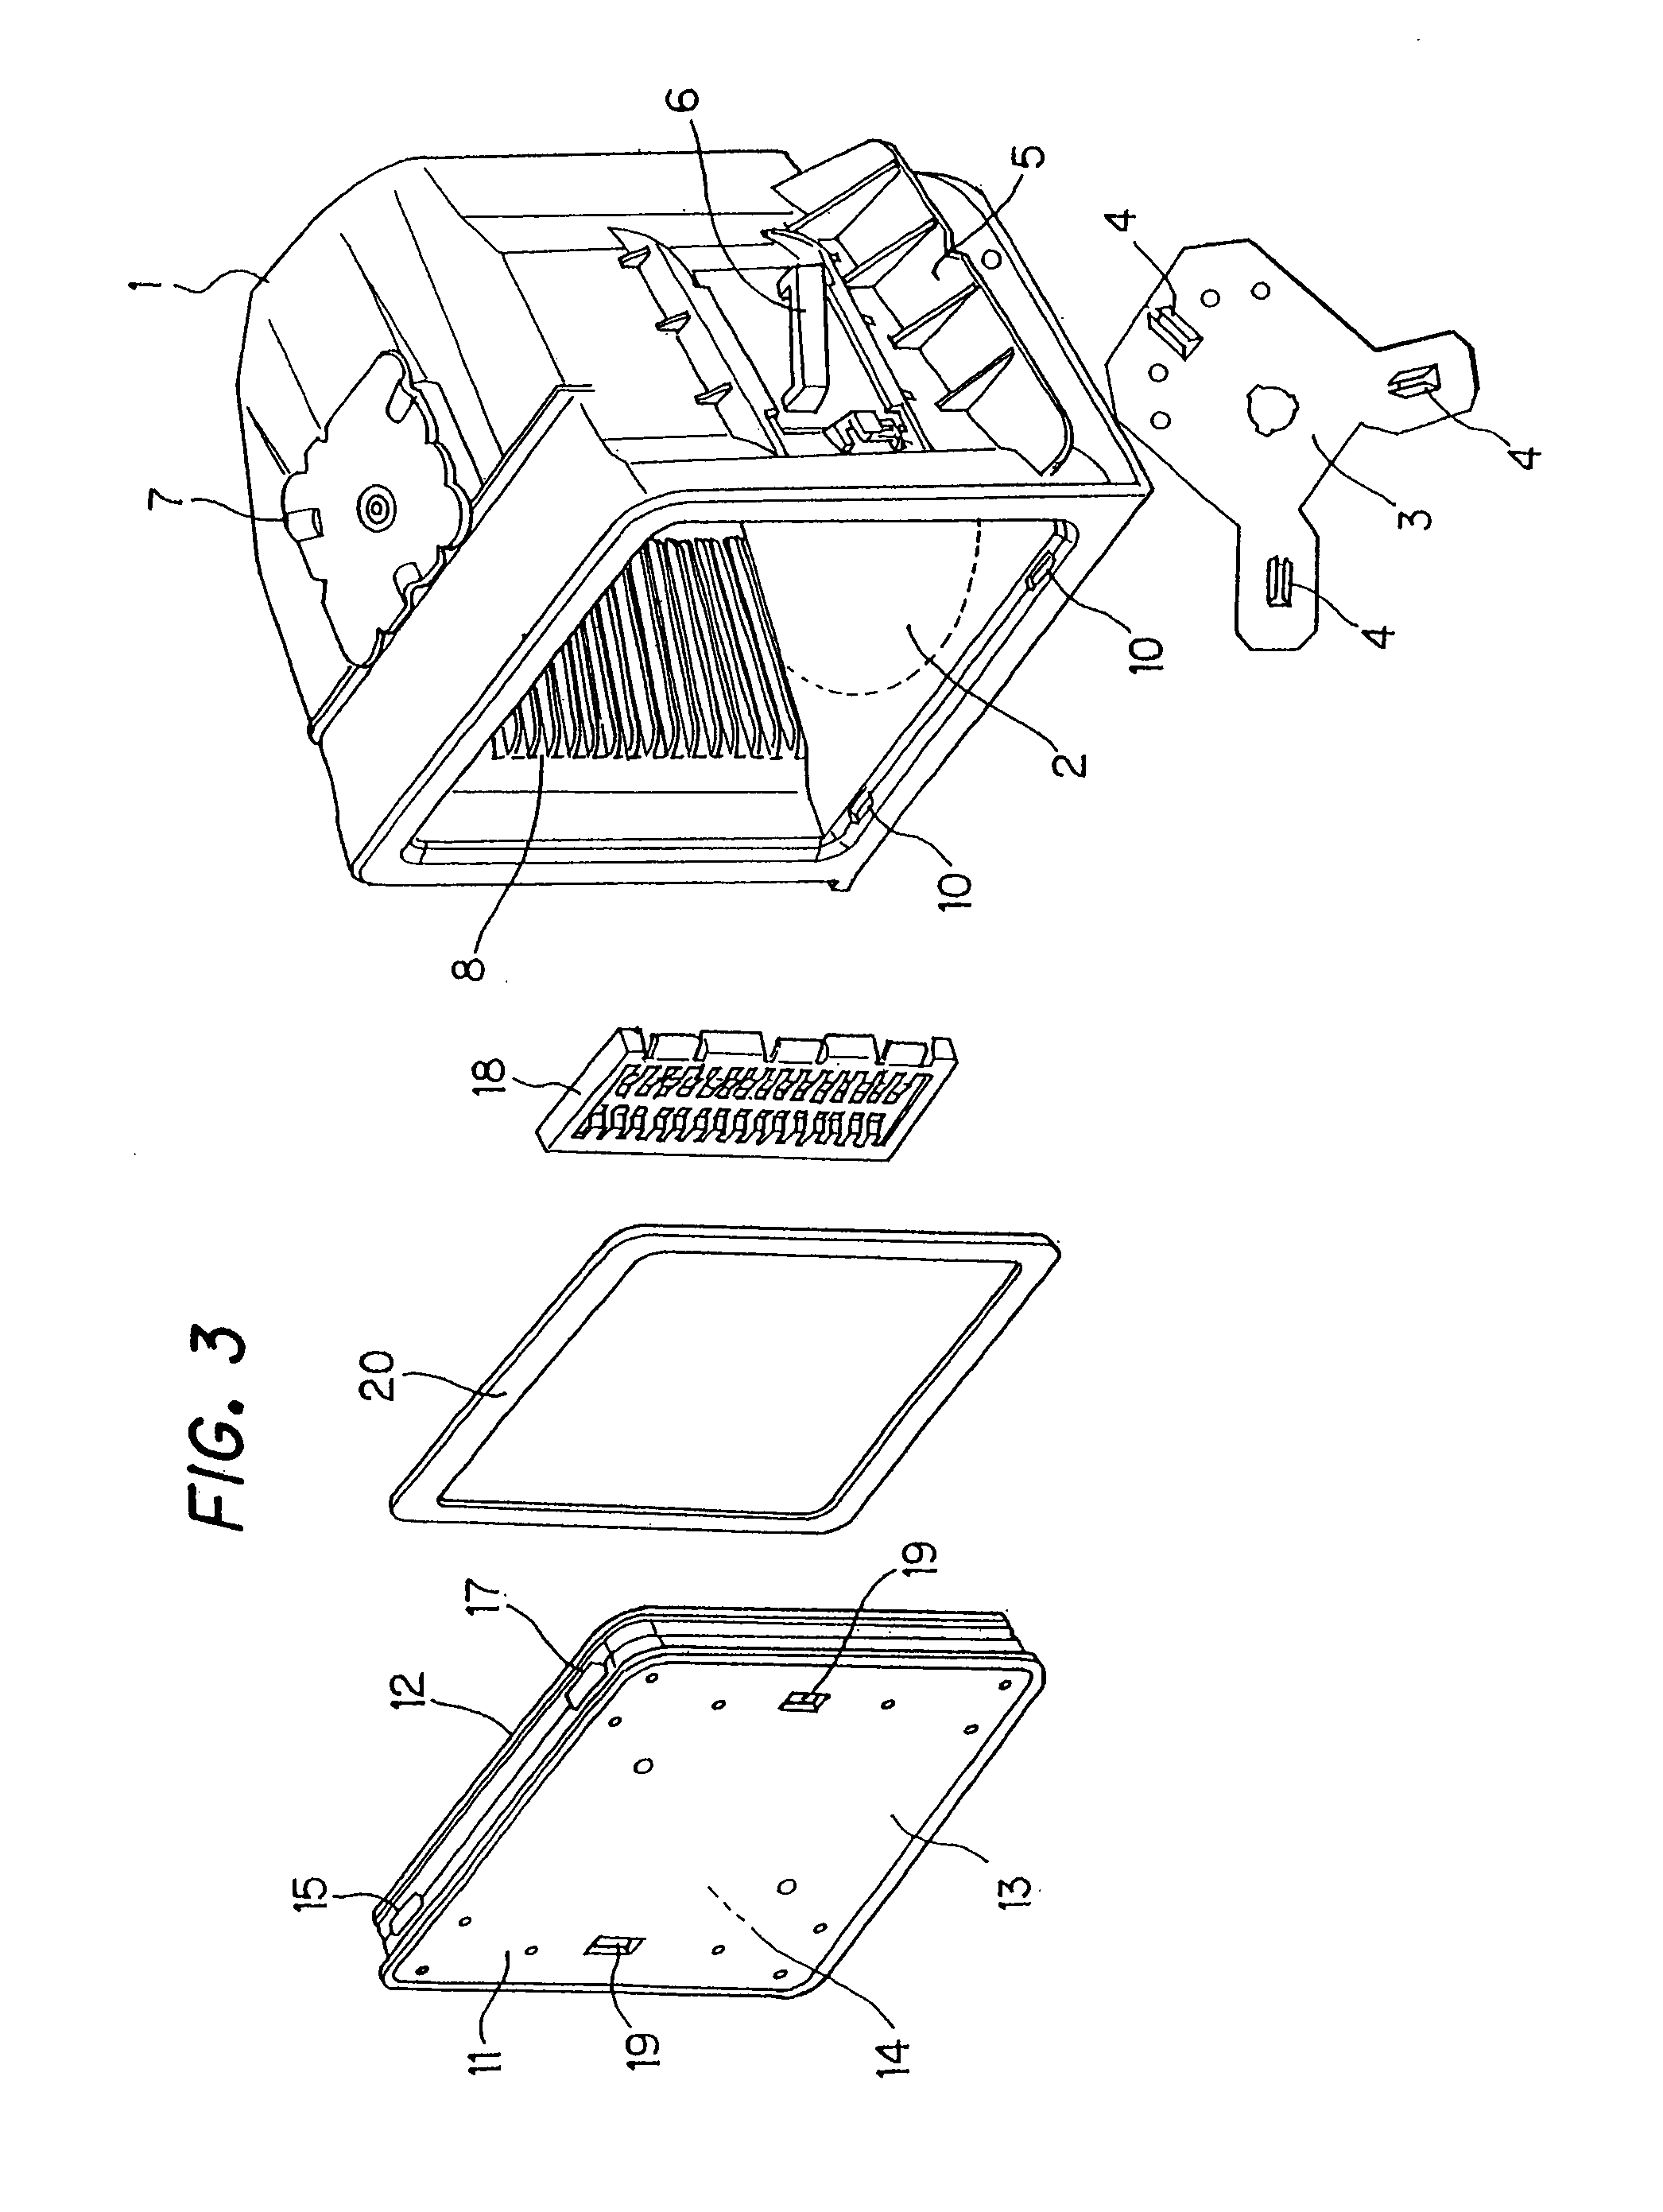 Sealing element with a protruding part approximately obliquely outward and a hermetic container using the same